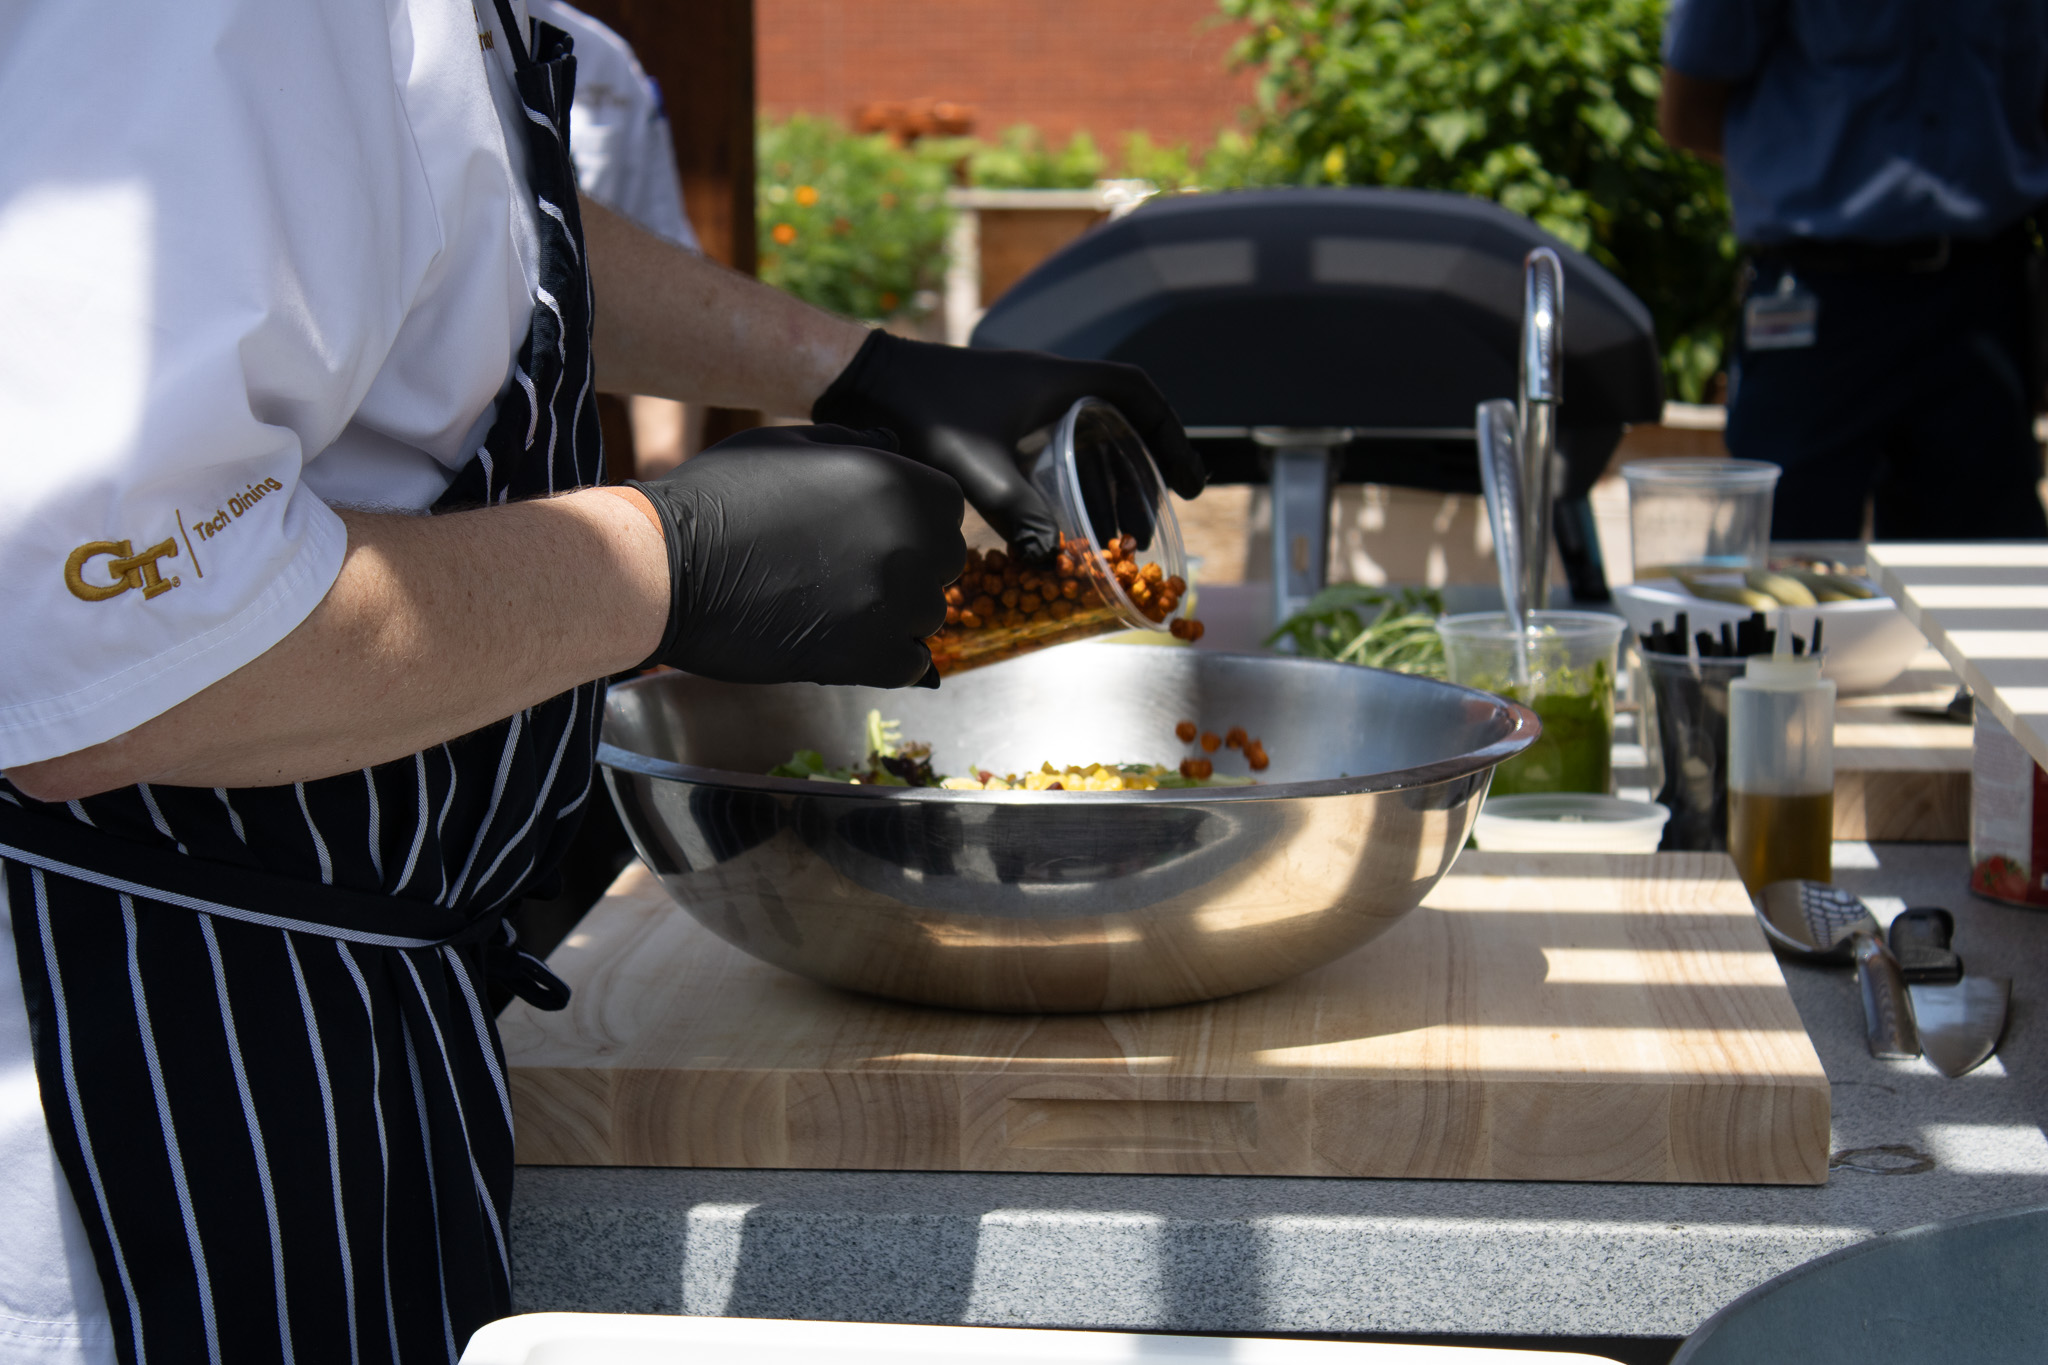 Chefs mixing ingredients in a stainless steel bowl